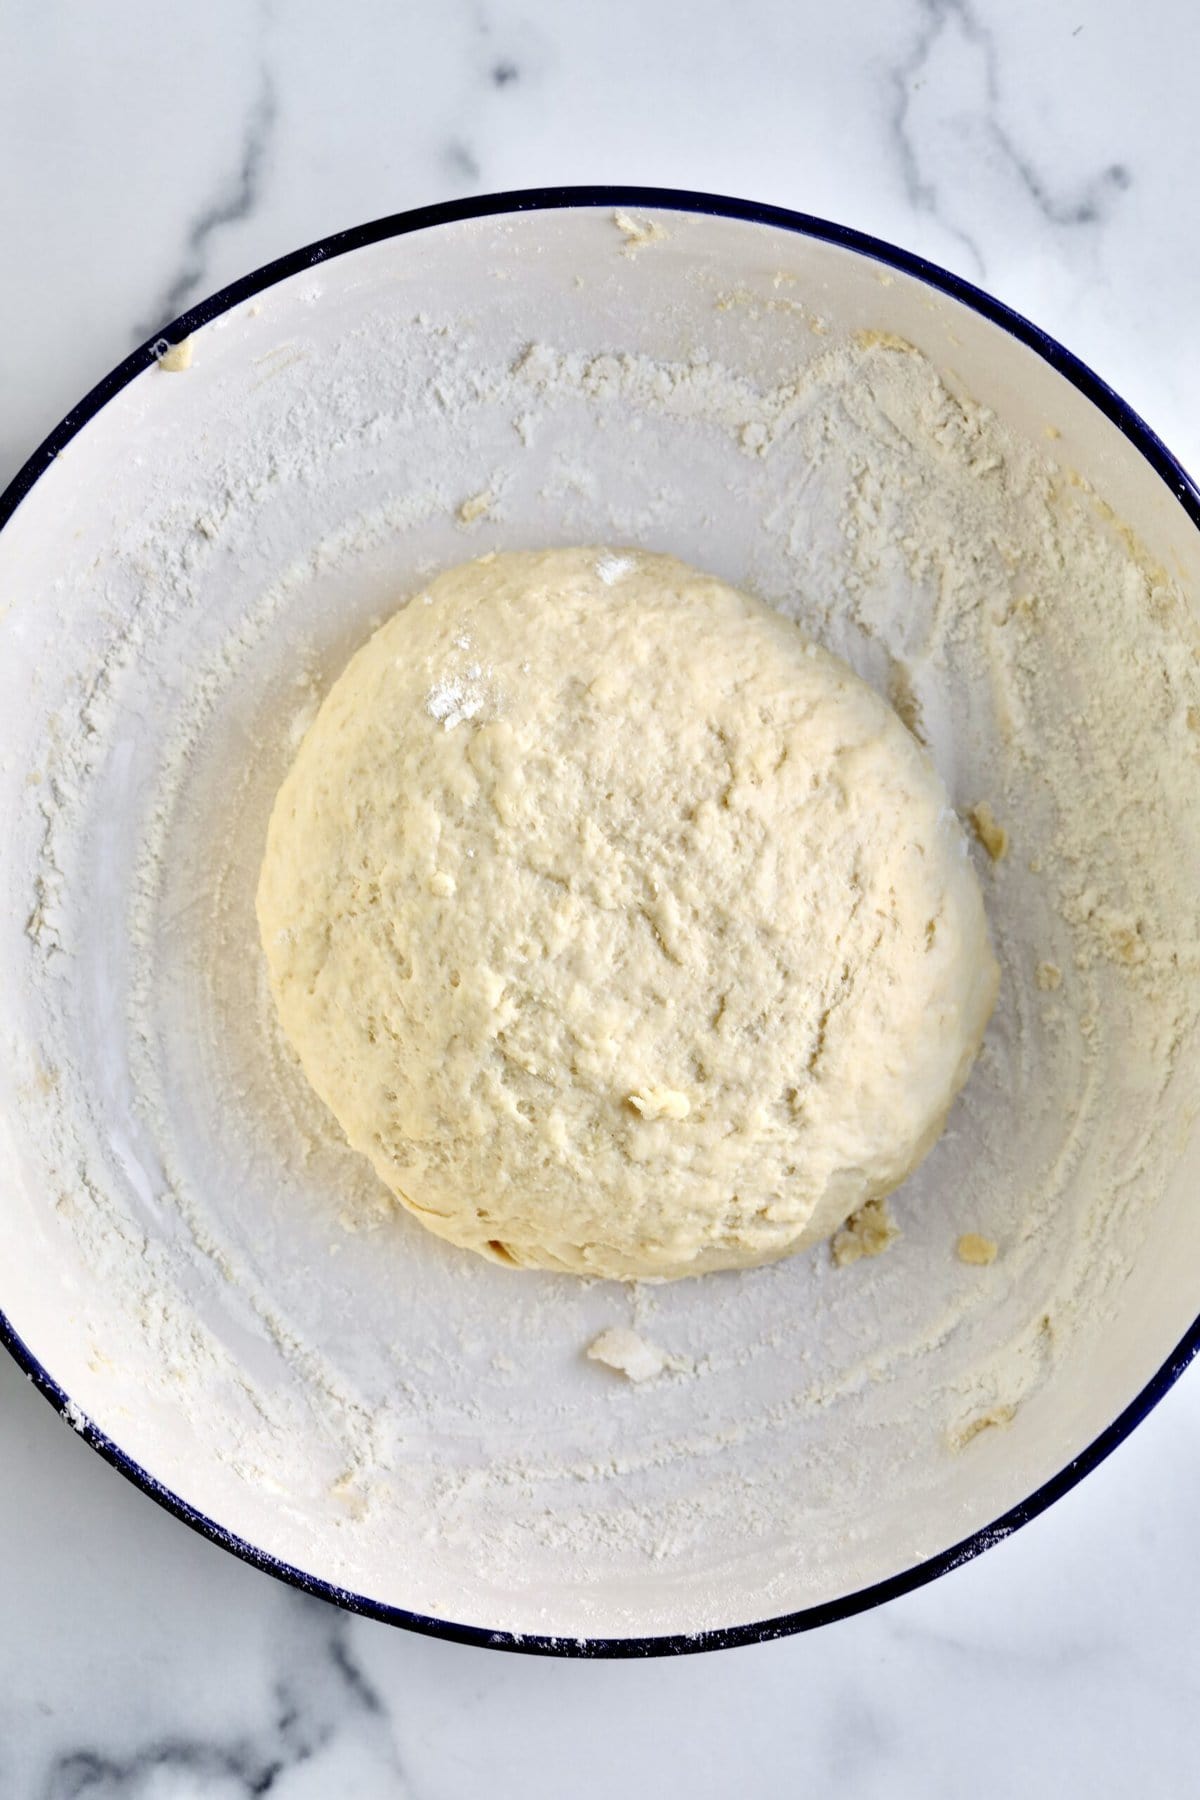 How to make Sardinian Pardulas Recipe- mix wet and dry ingredients and make a smooth dough ball. Let rest for 1 hour.